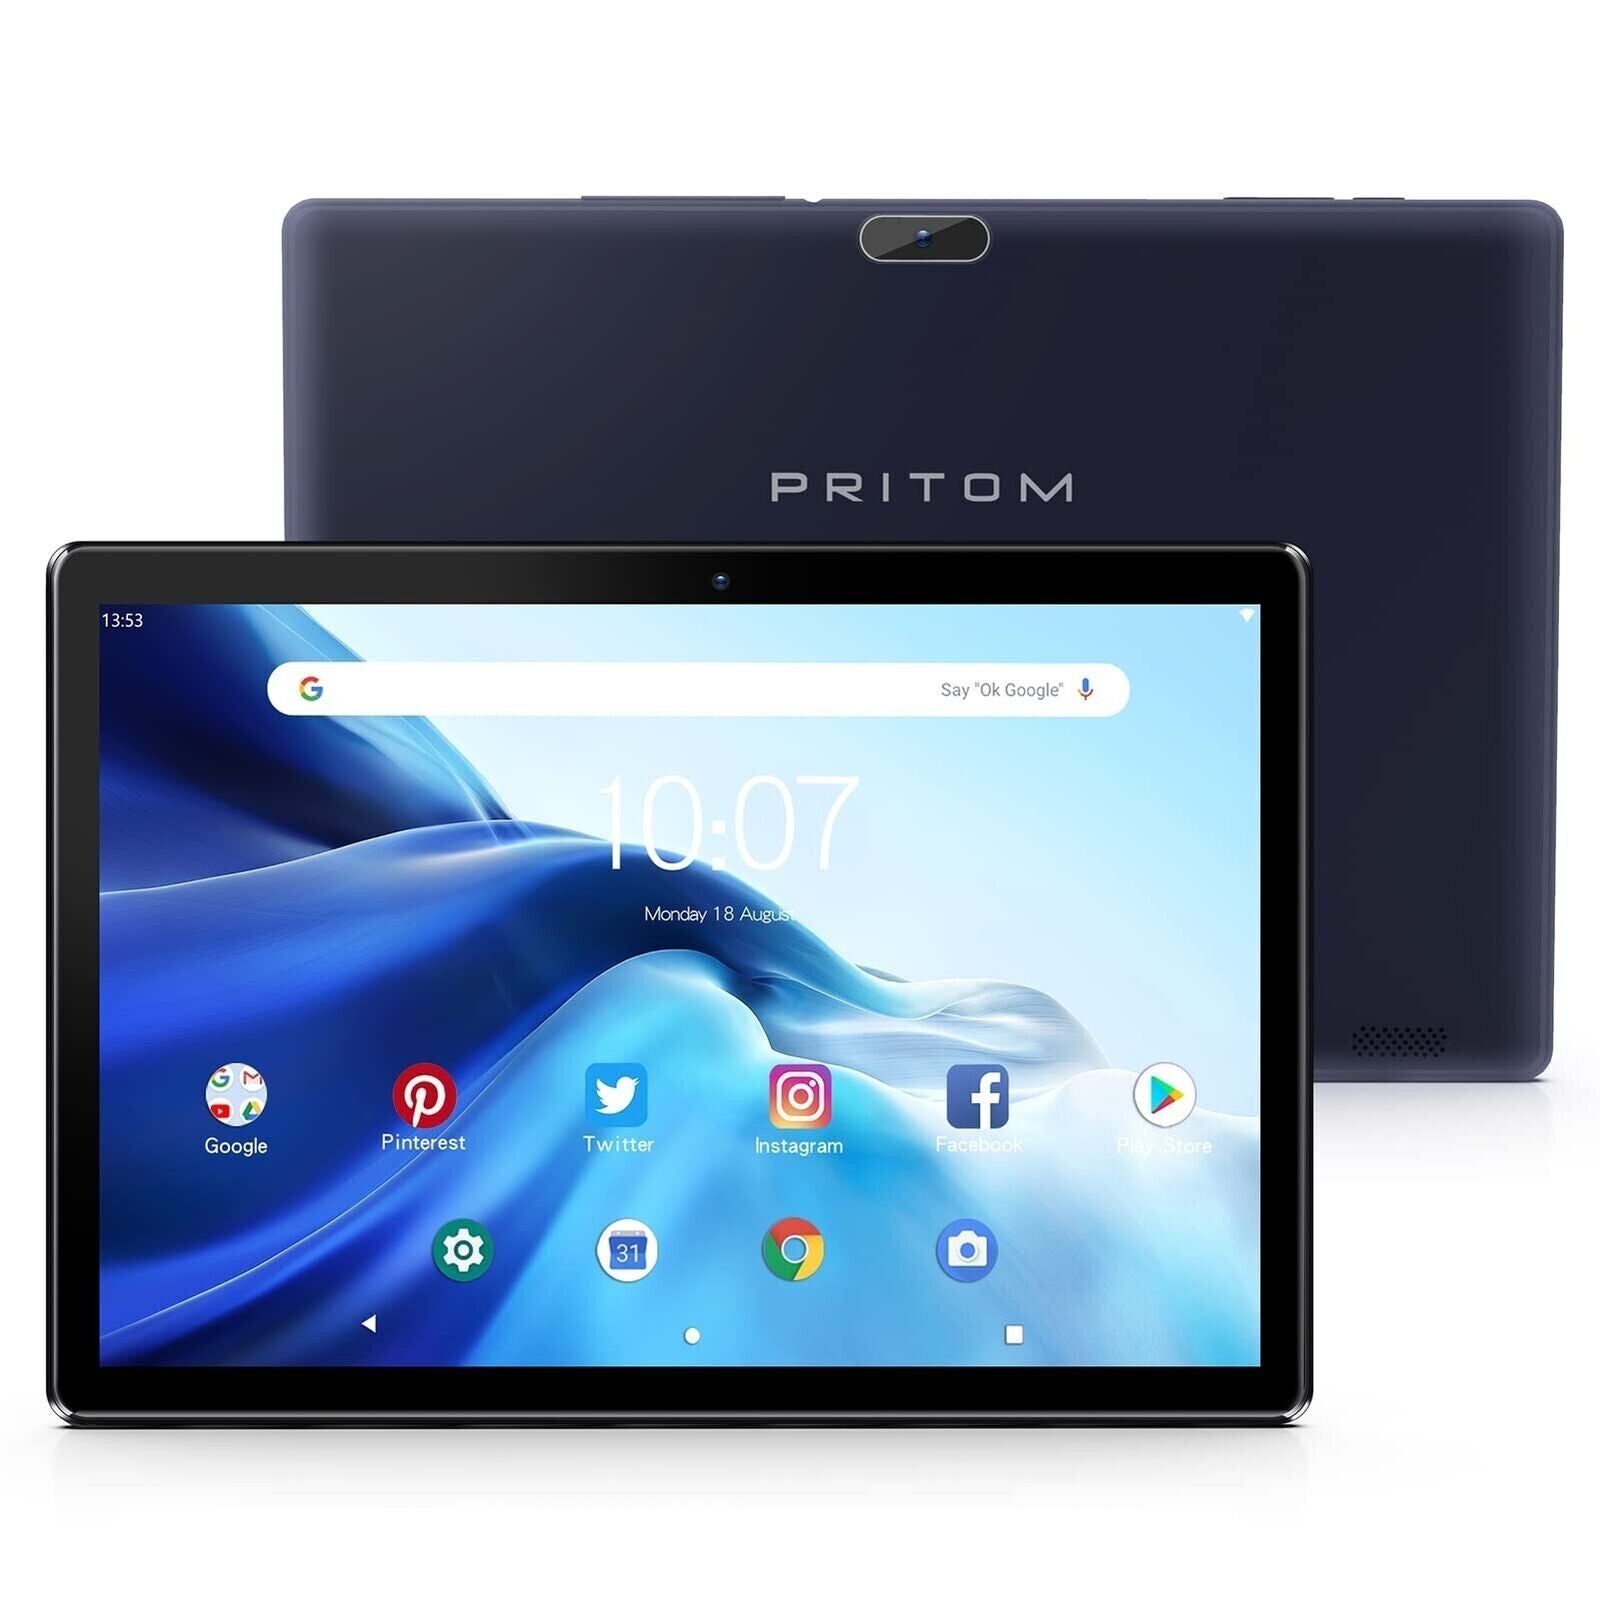 PRITOM Android Wifi Tablet Android 10 64GB ROM Expandable to 512GB Quad Core